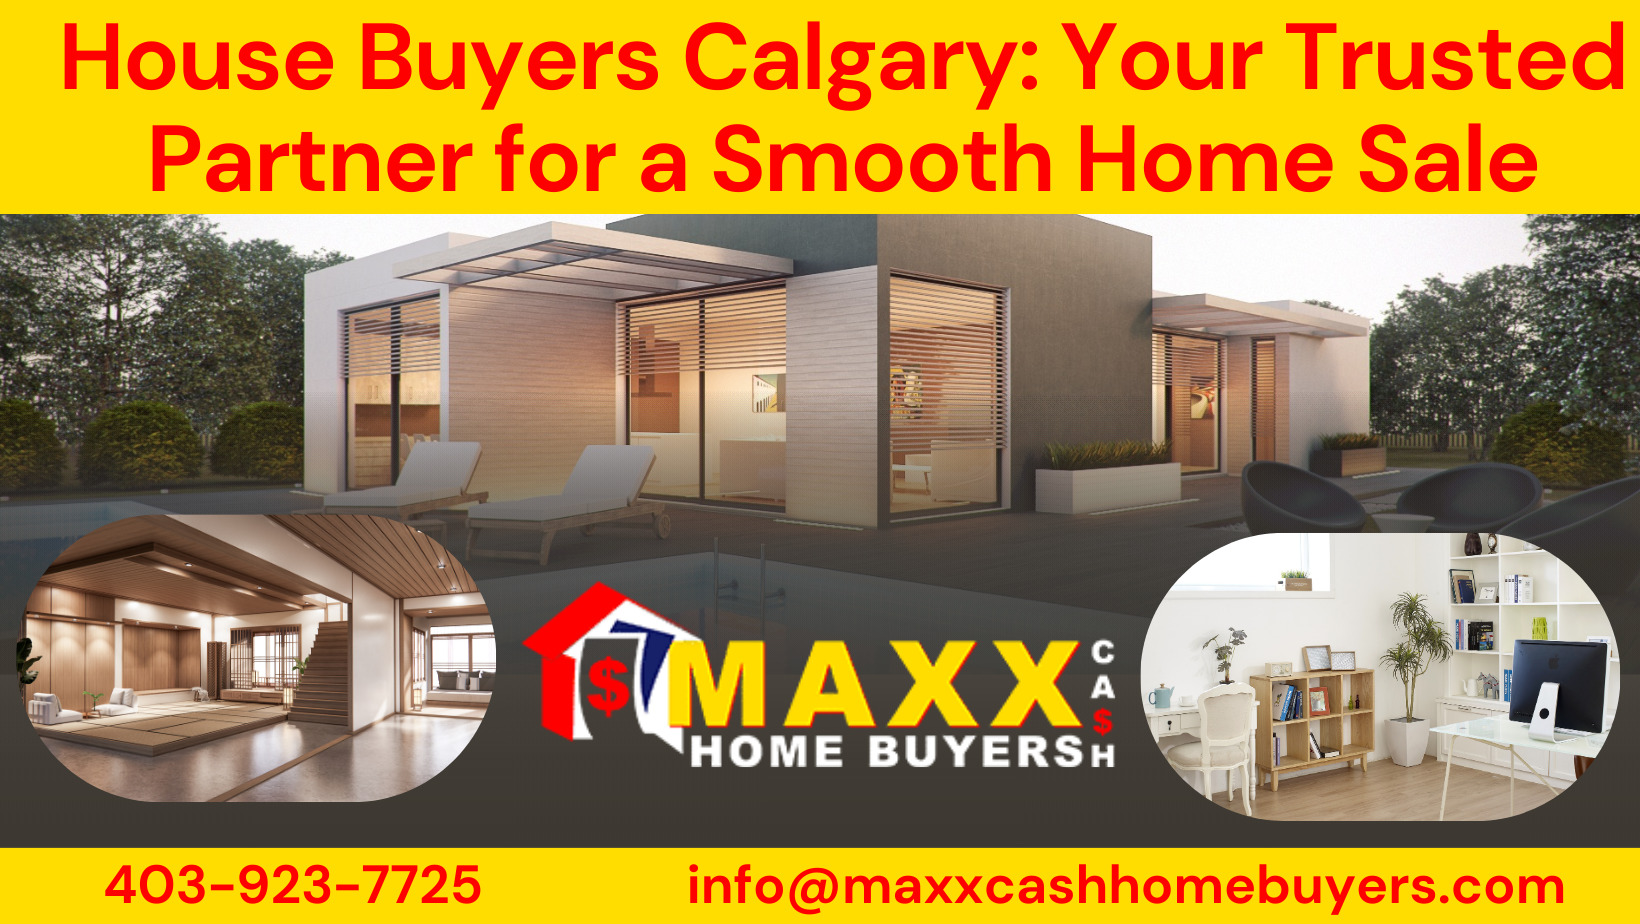 House Buyers Calgary: Your Trusted Partner for a Smooth Home Sale